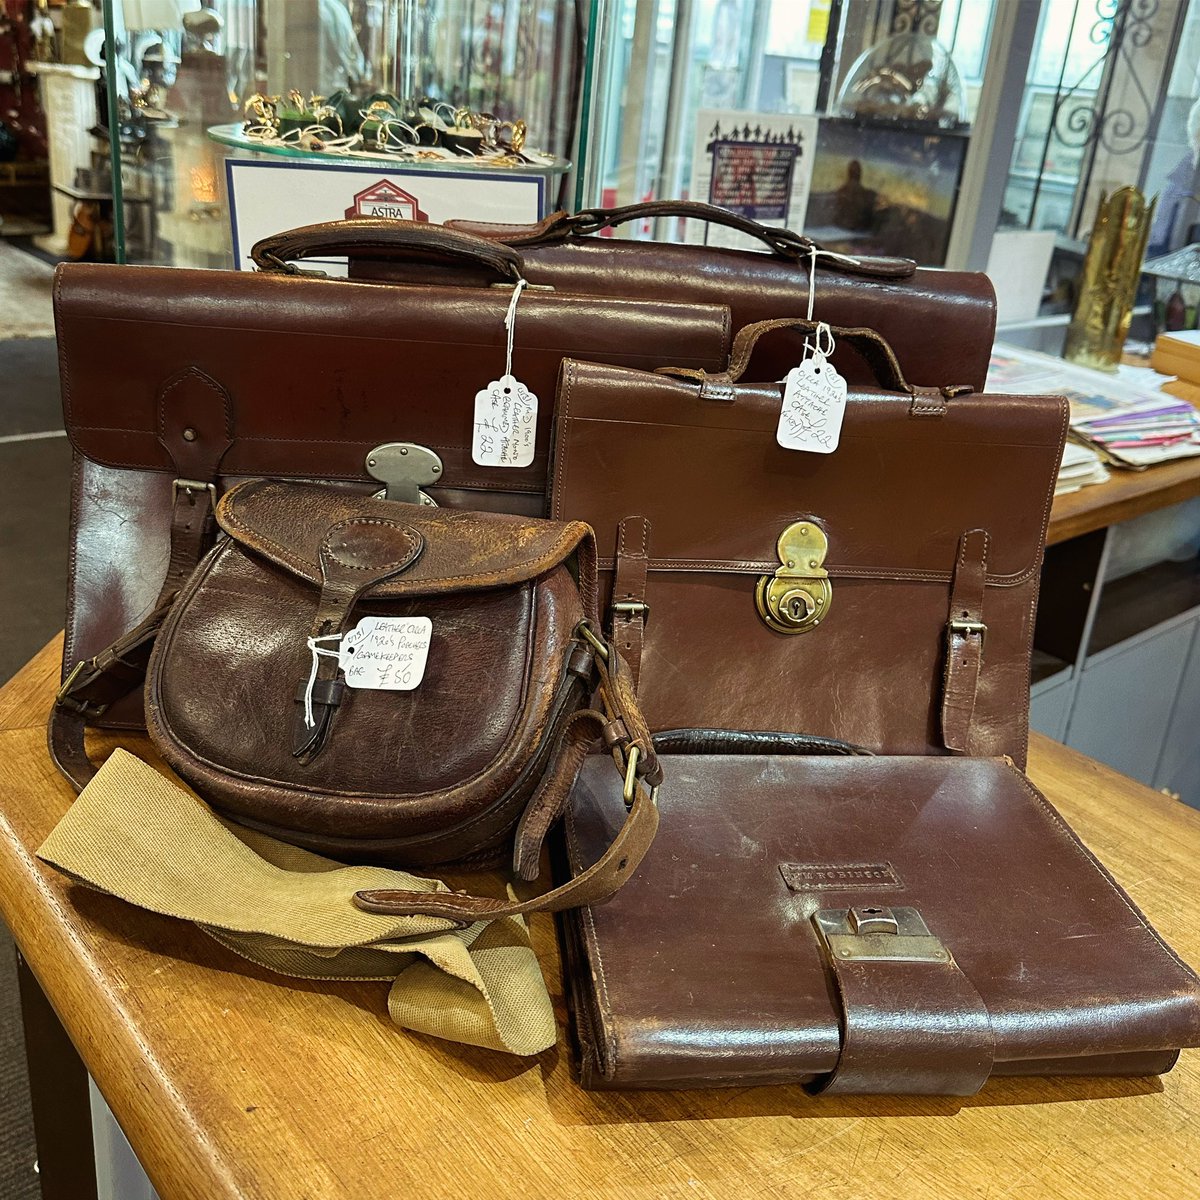 Fresh in this collection of leather cases all owned by the same gentleman. #freshstock #leathercases #leatherbriefcase #leatherbriefcase #leatherbag #astraantiquescentre #hemswell #lincolnshire